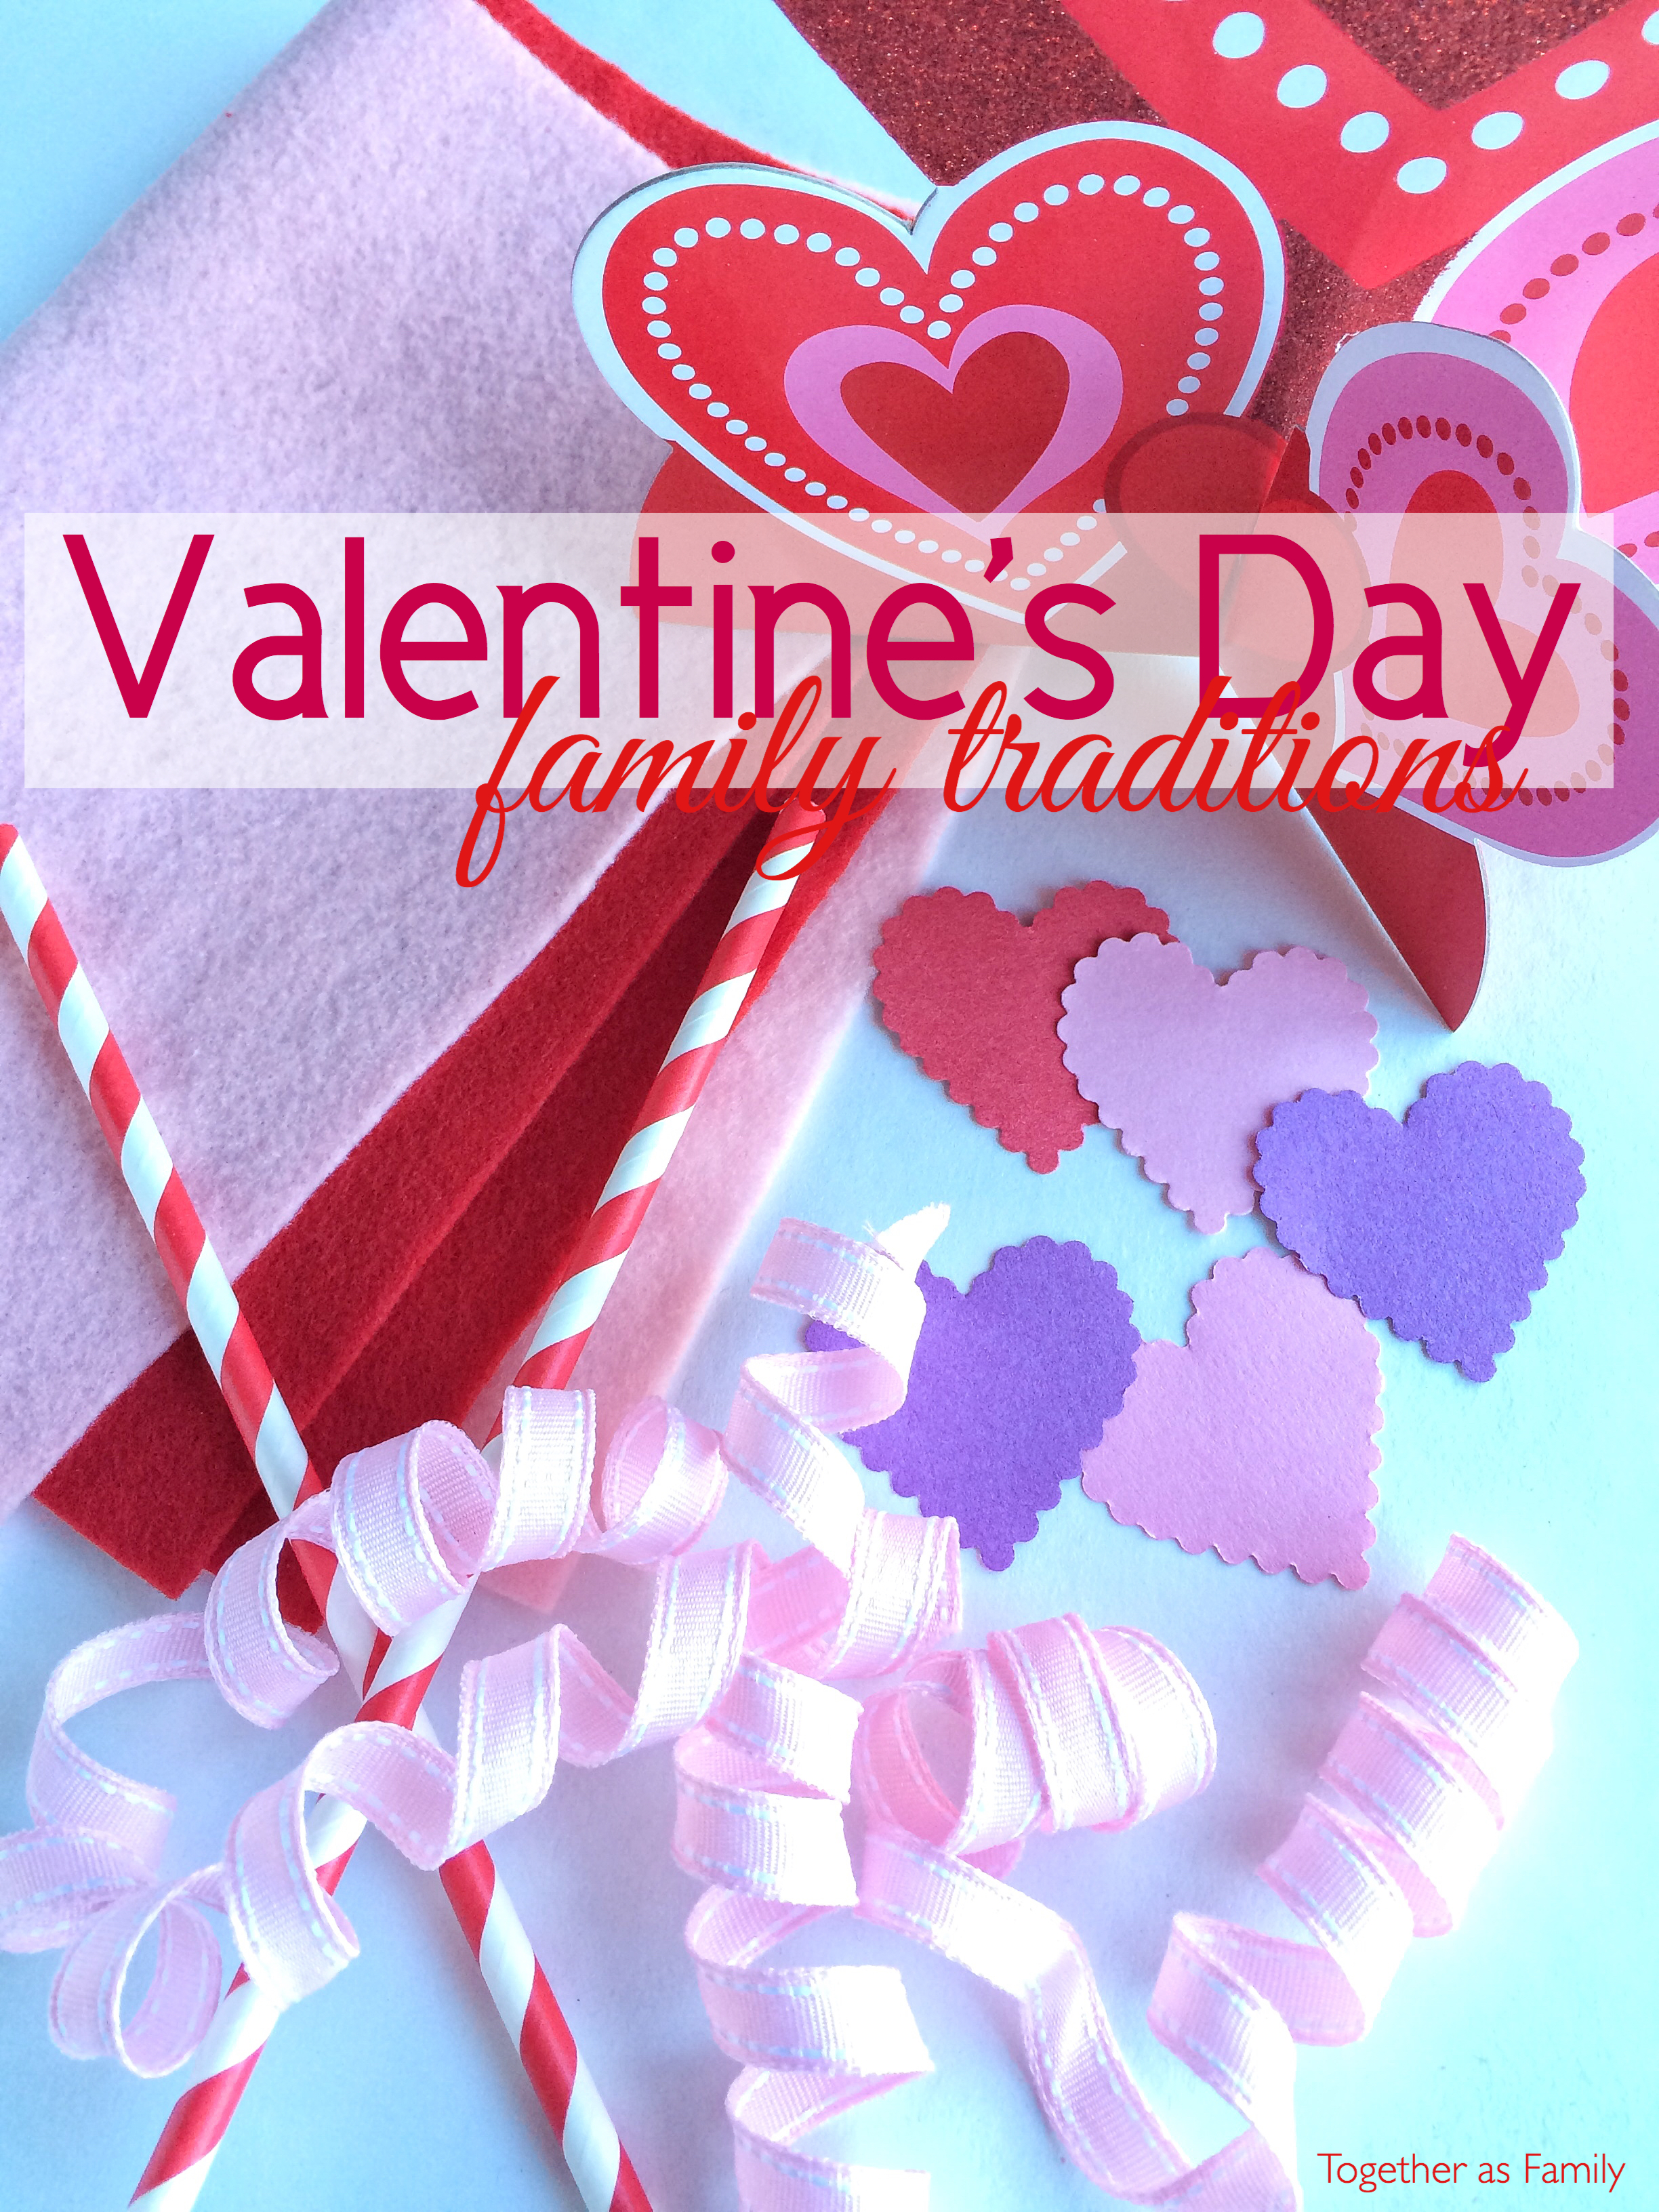 Valentine's Day Traditions - Together as Family